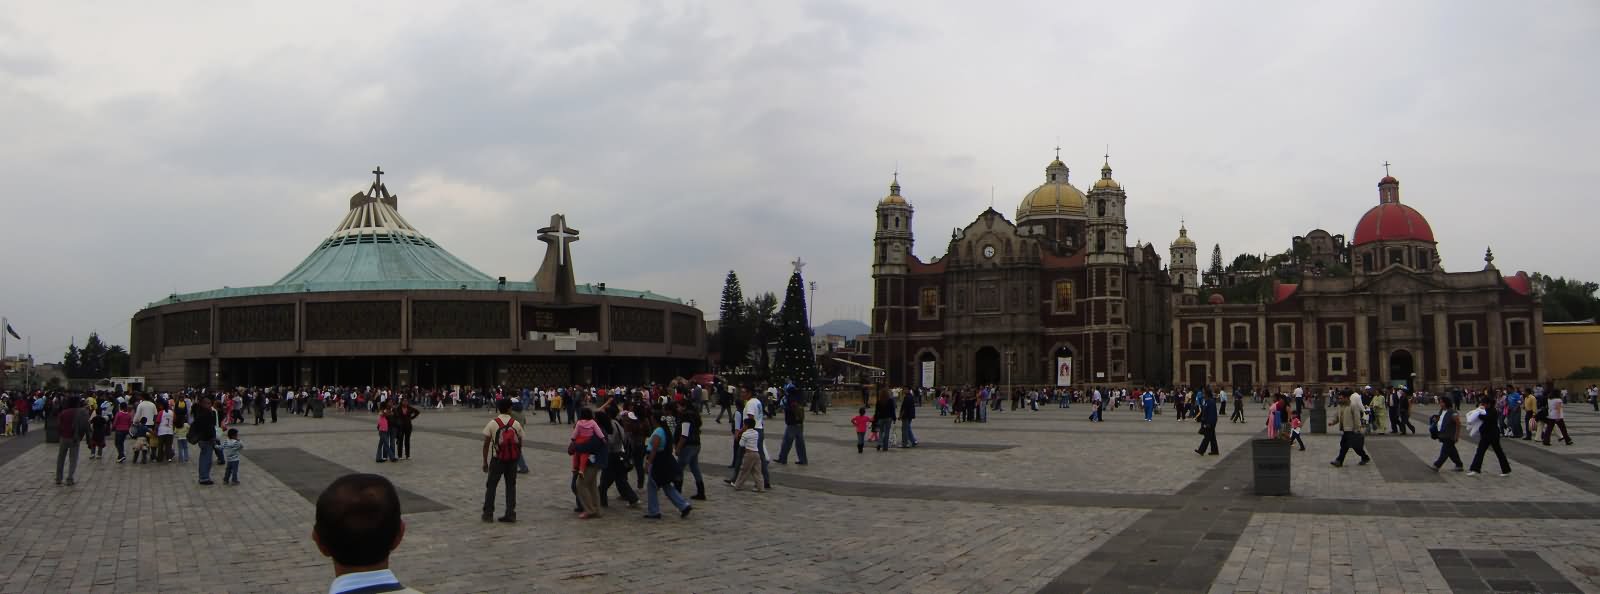 Panorama View Of The Basilica of Our Lady of Guadalupe